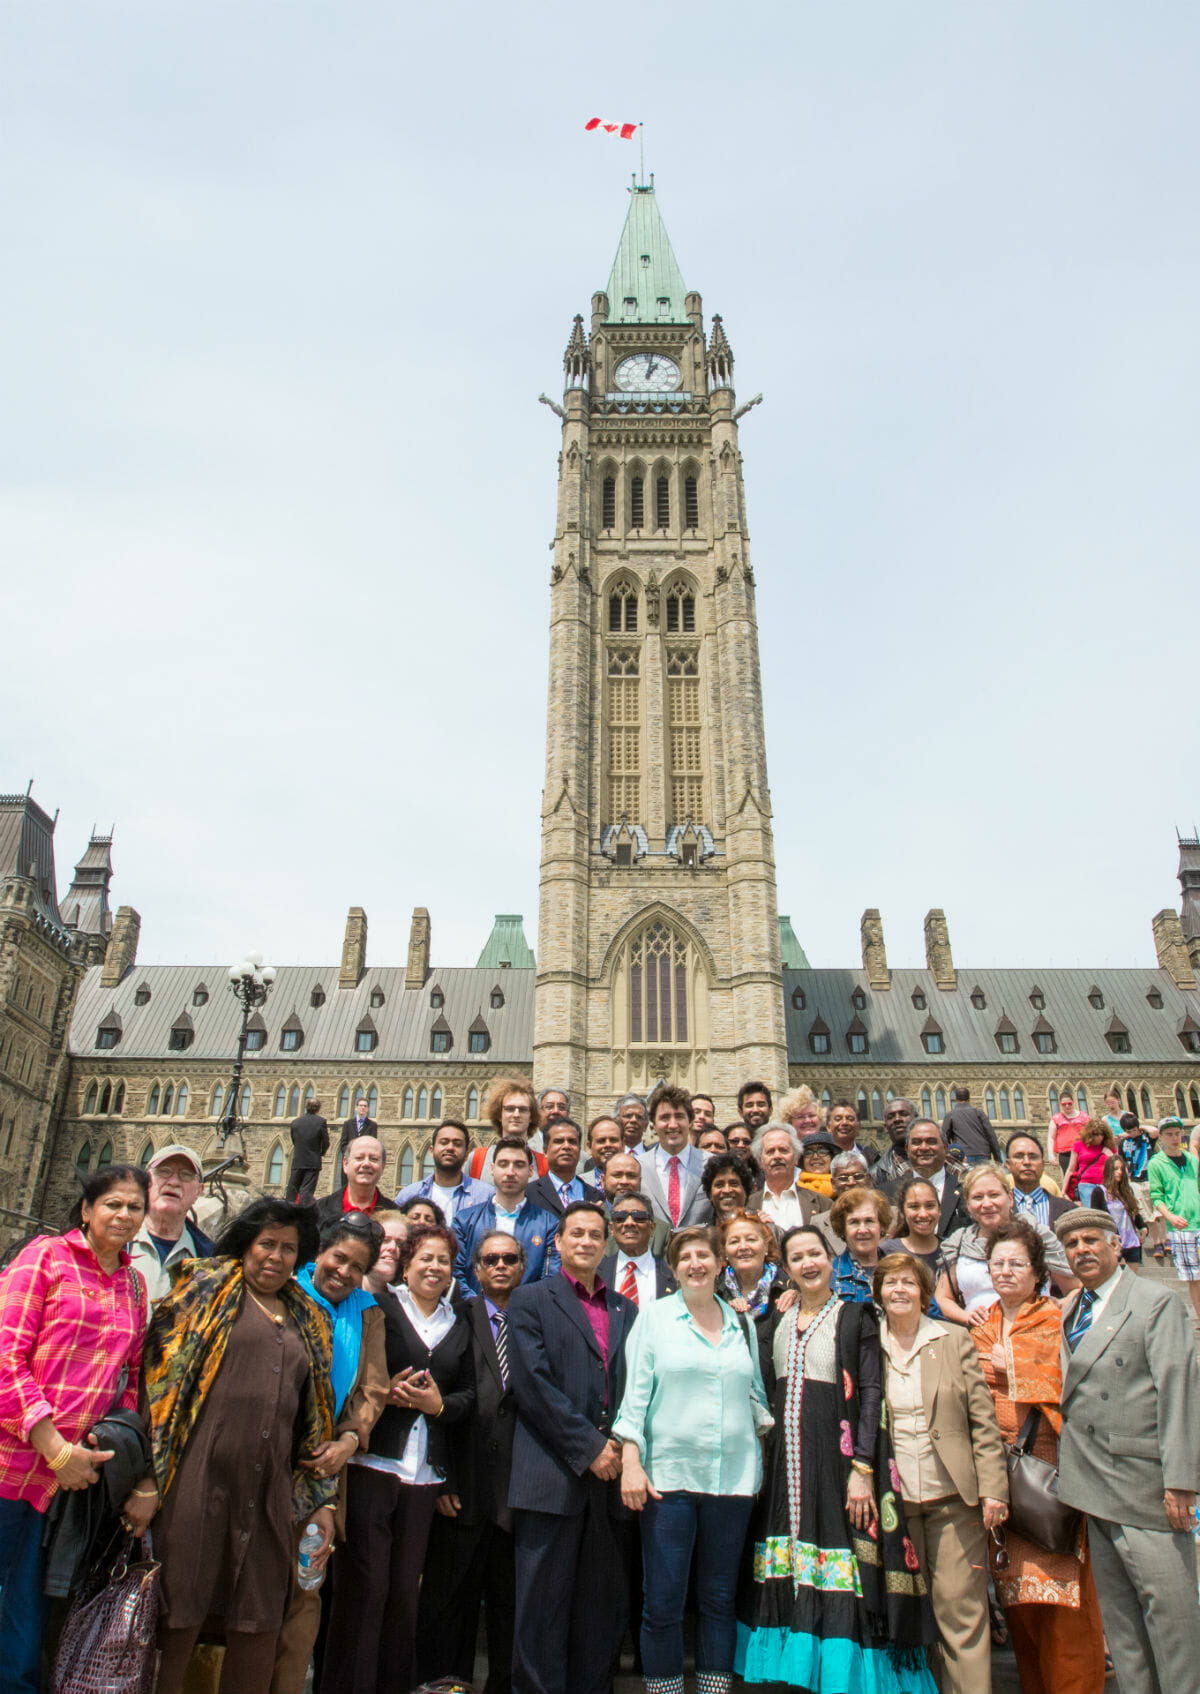 Justin welcomes Papineau constituents to Ottawa for a day on the hill. May 27, 2014.